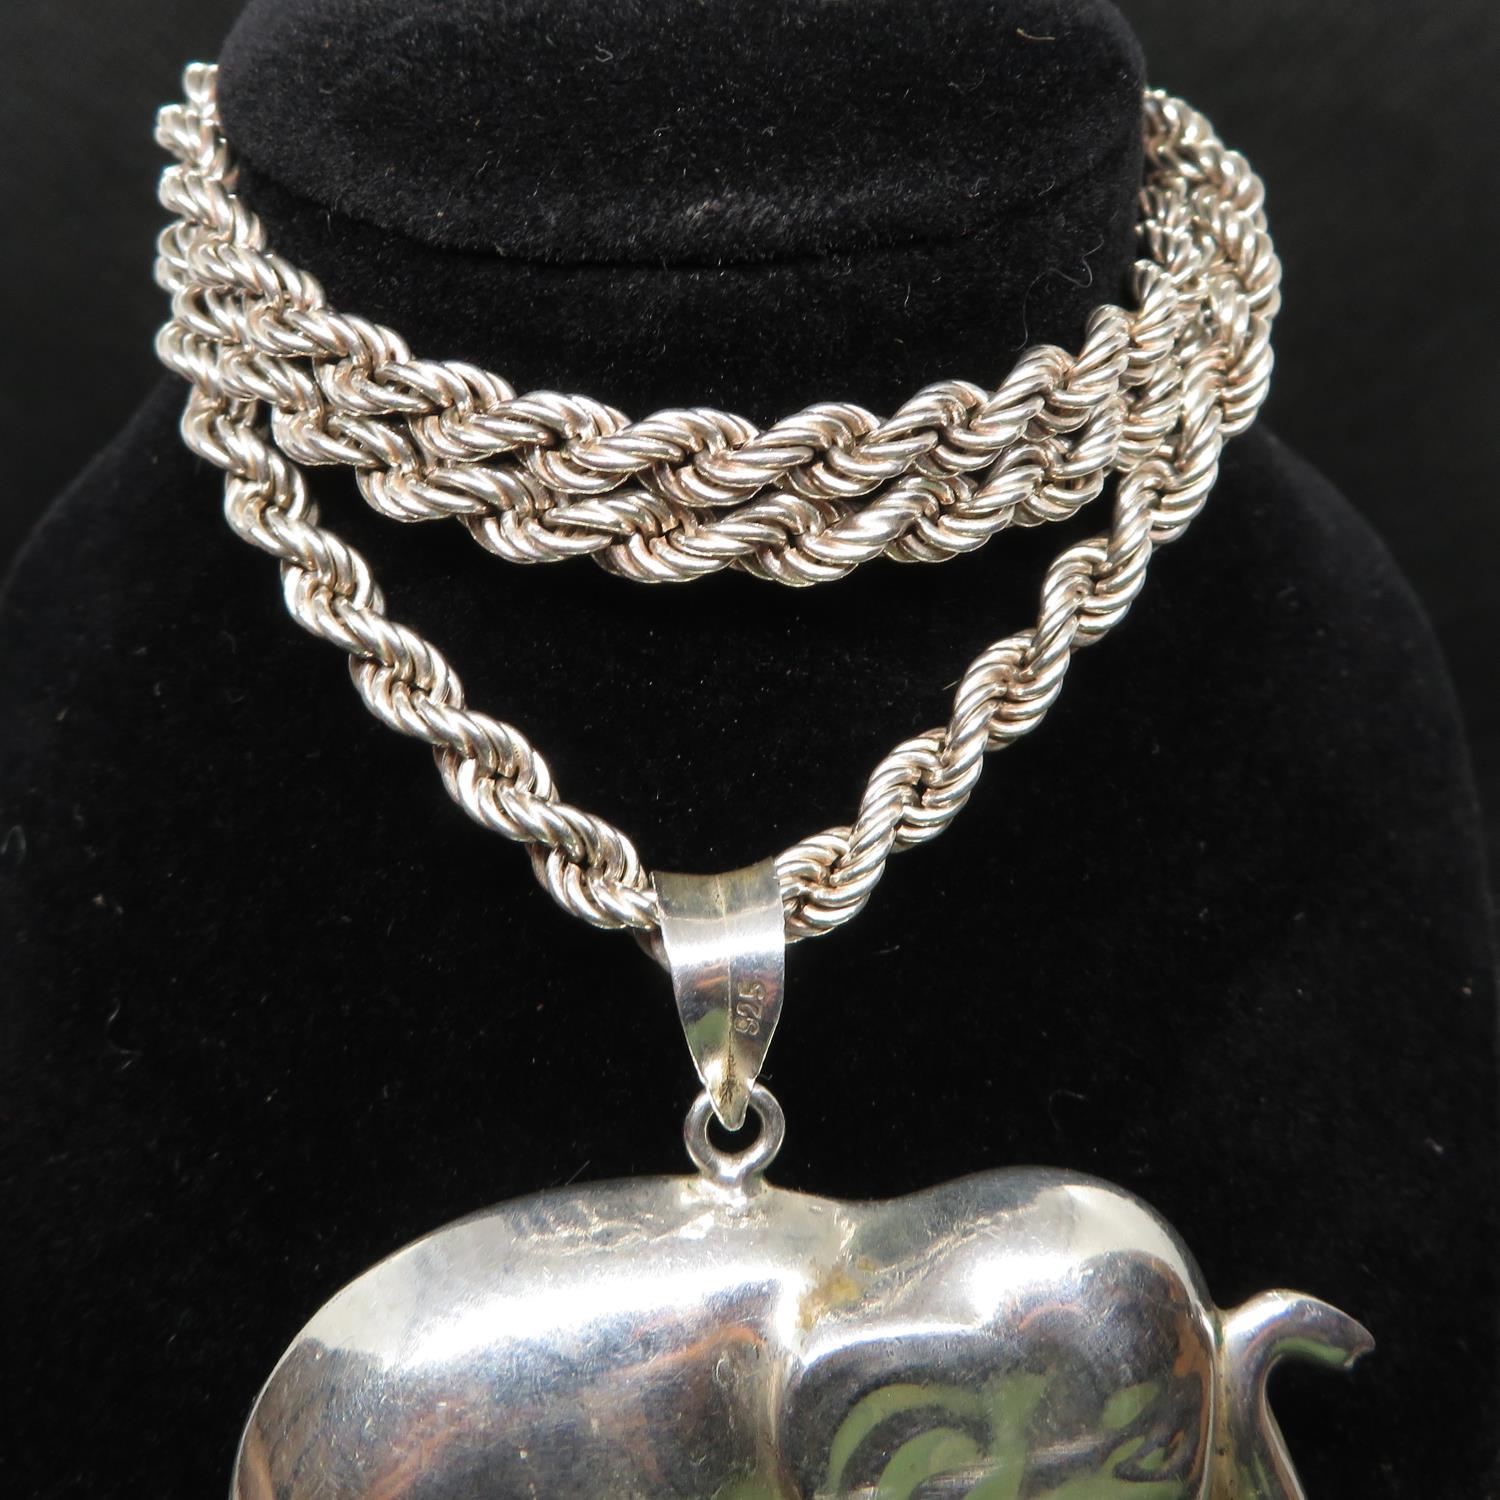 Large silver elephant pendant on 20" silver chain 33.5g - Image 2 of 3